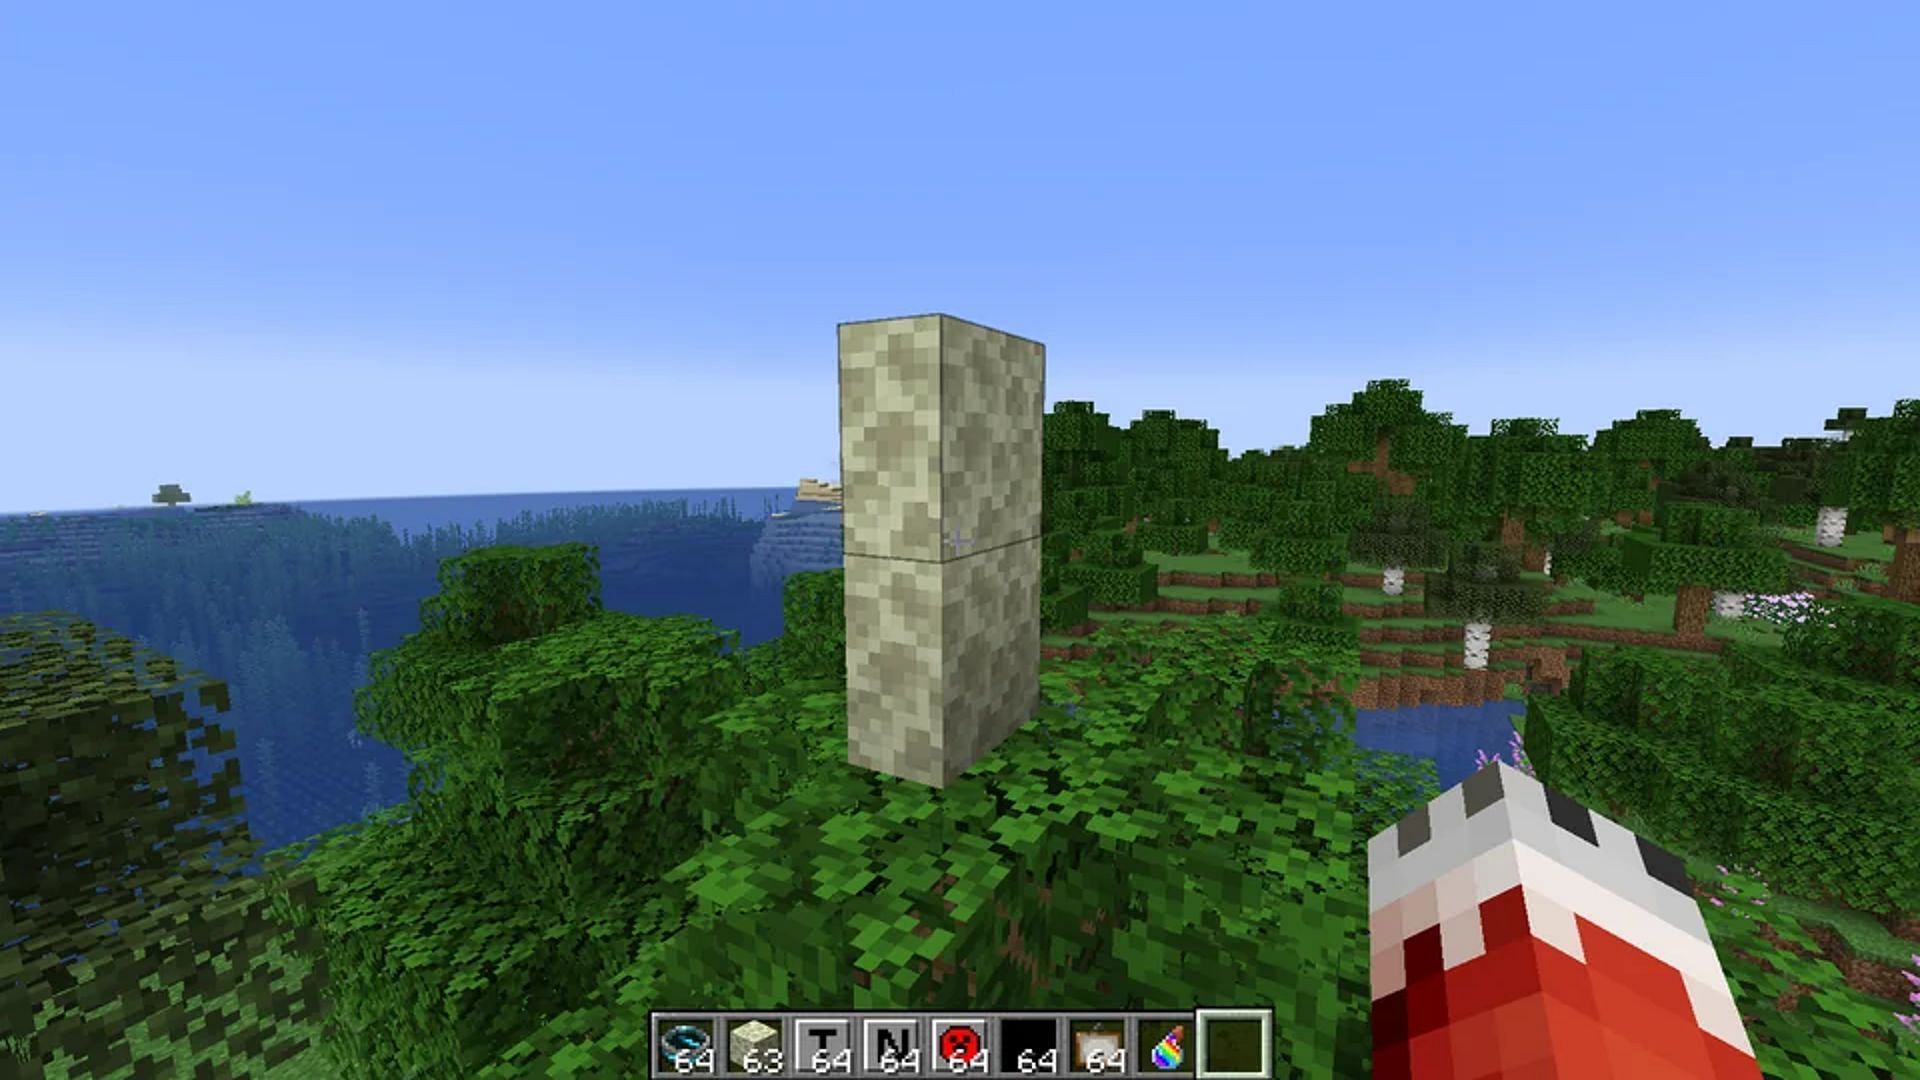 Minecraft The Vote Update Everything you need to know about April Fool